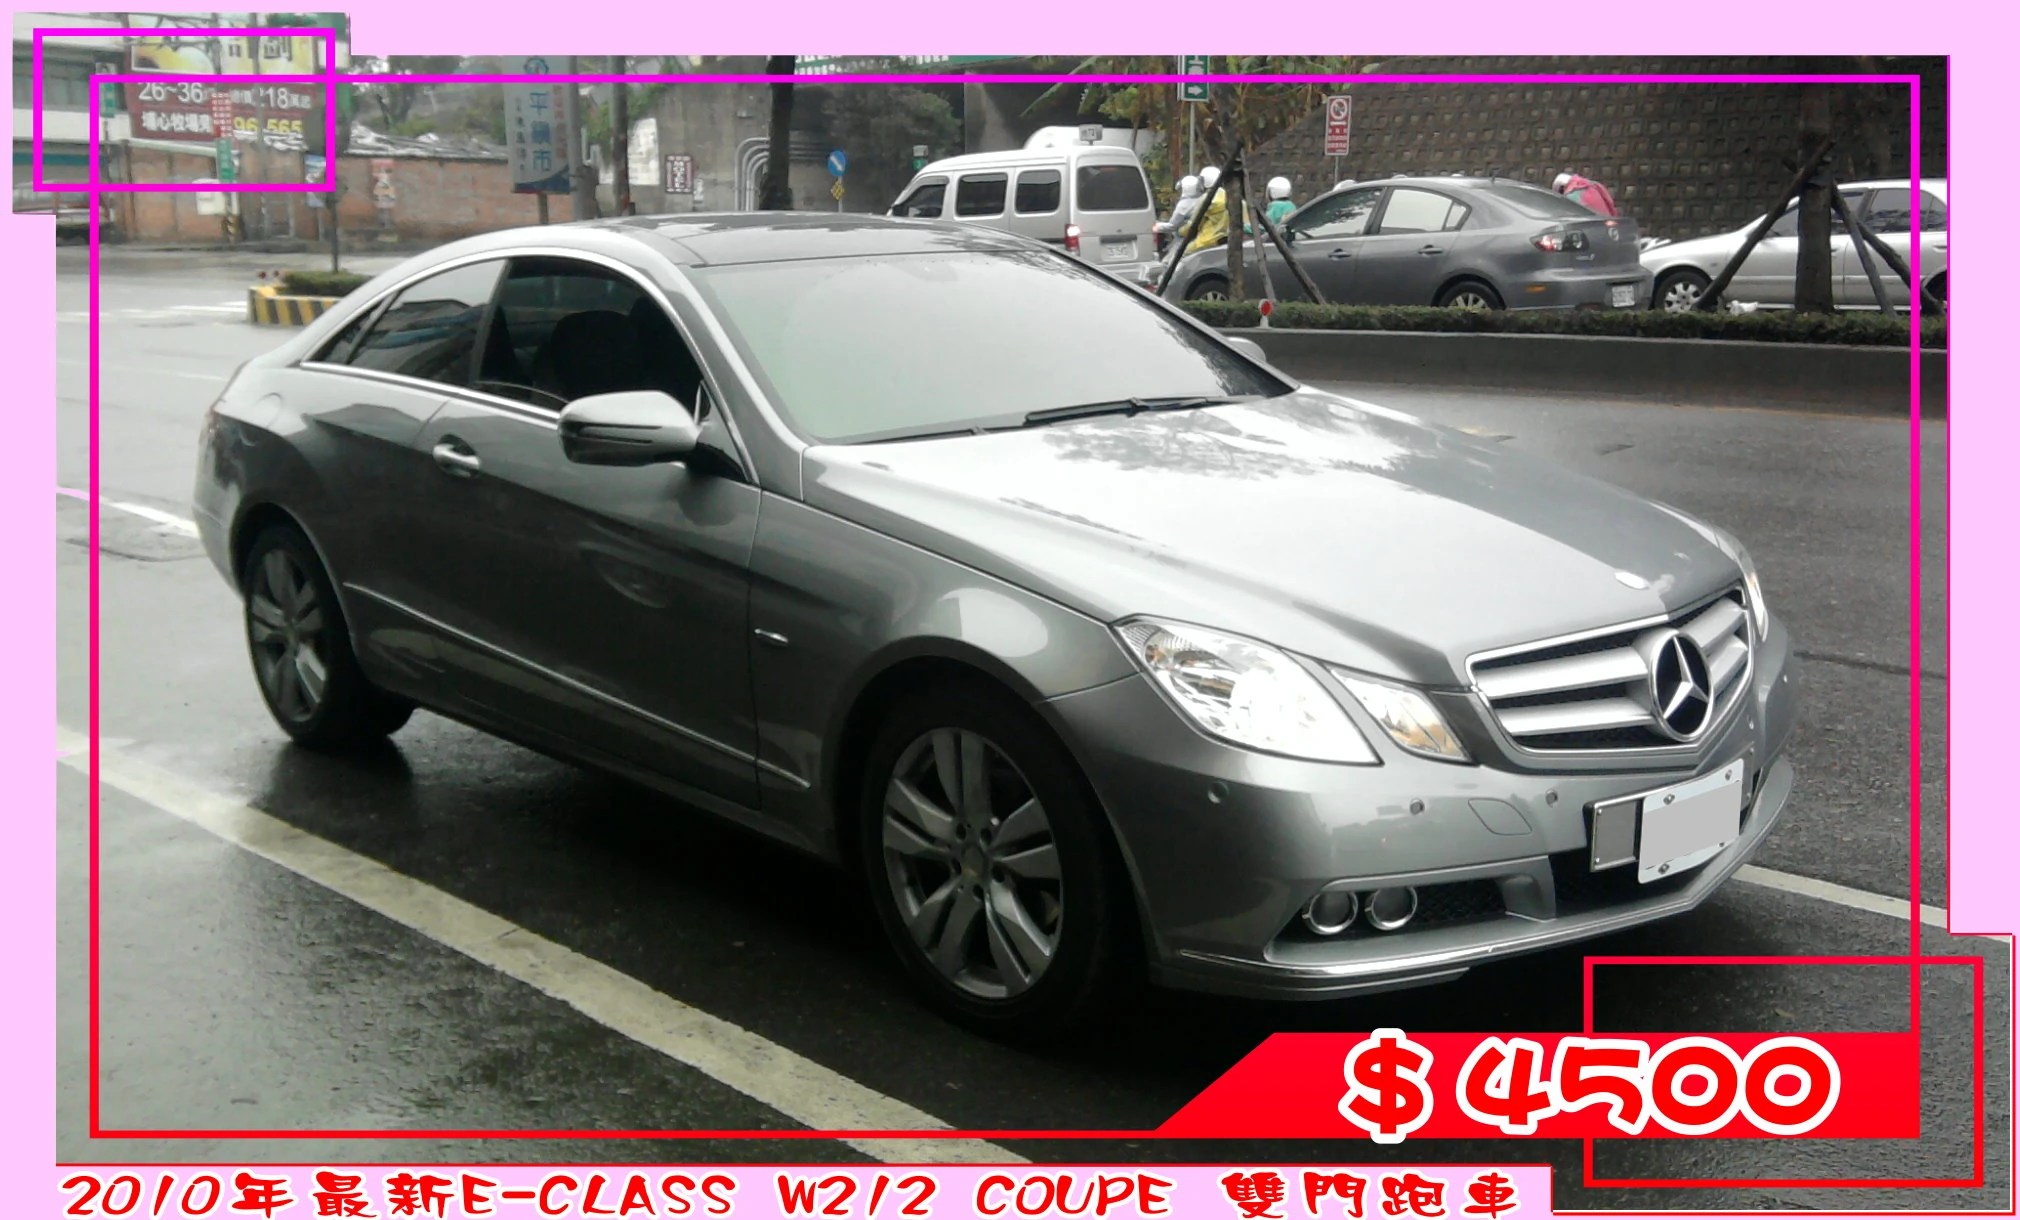 BENZ最新E-CLASS COUPE